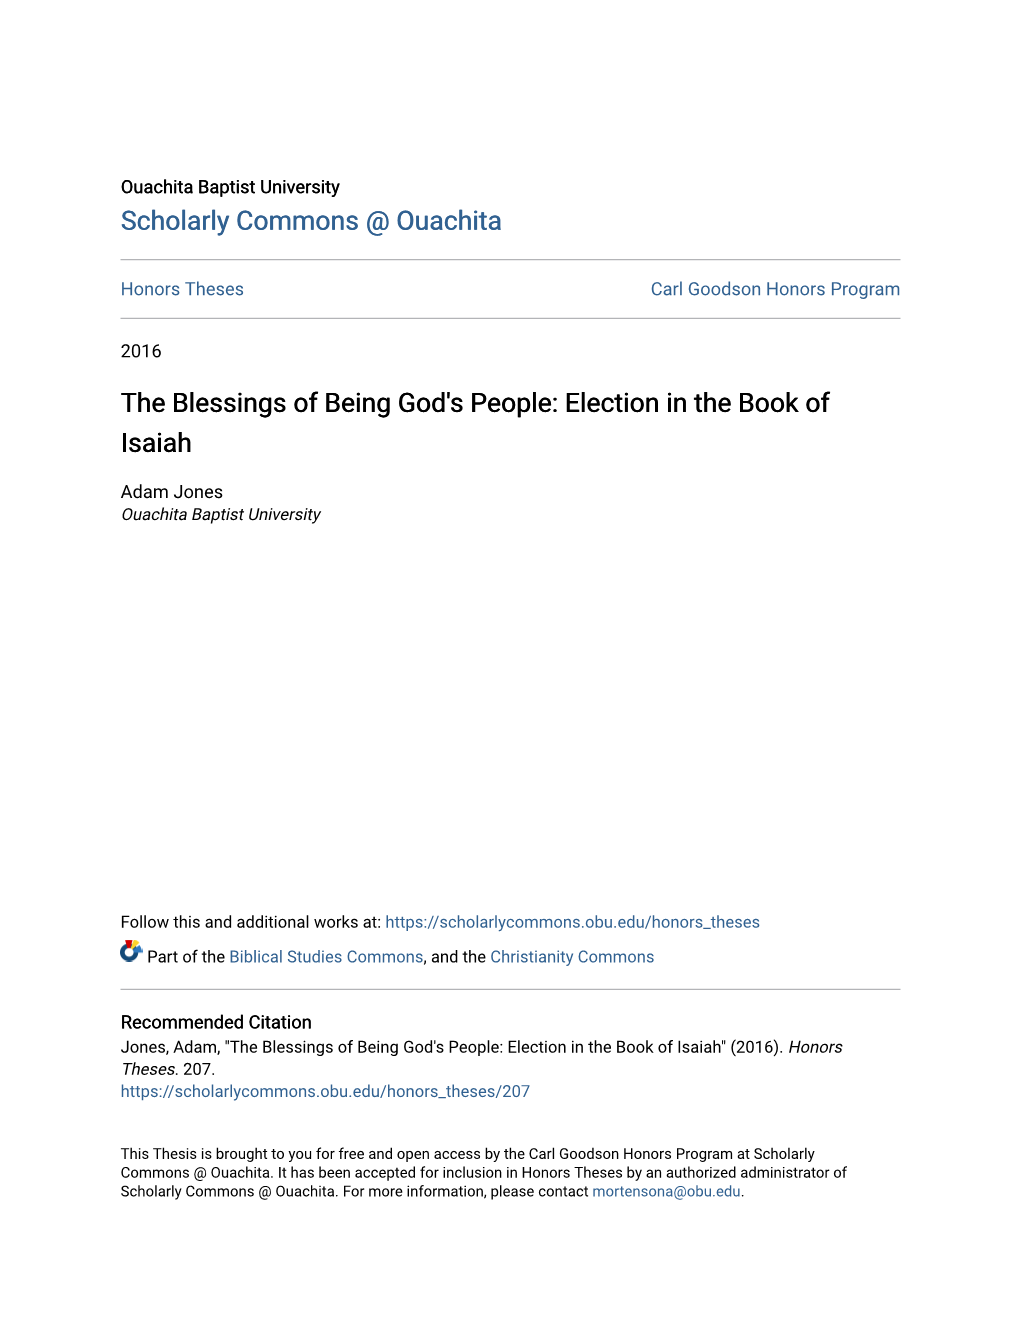 The Blessings of Being God's People: Election in the Book of Isaiah